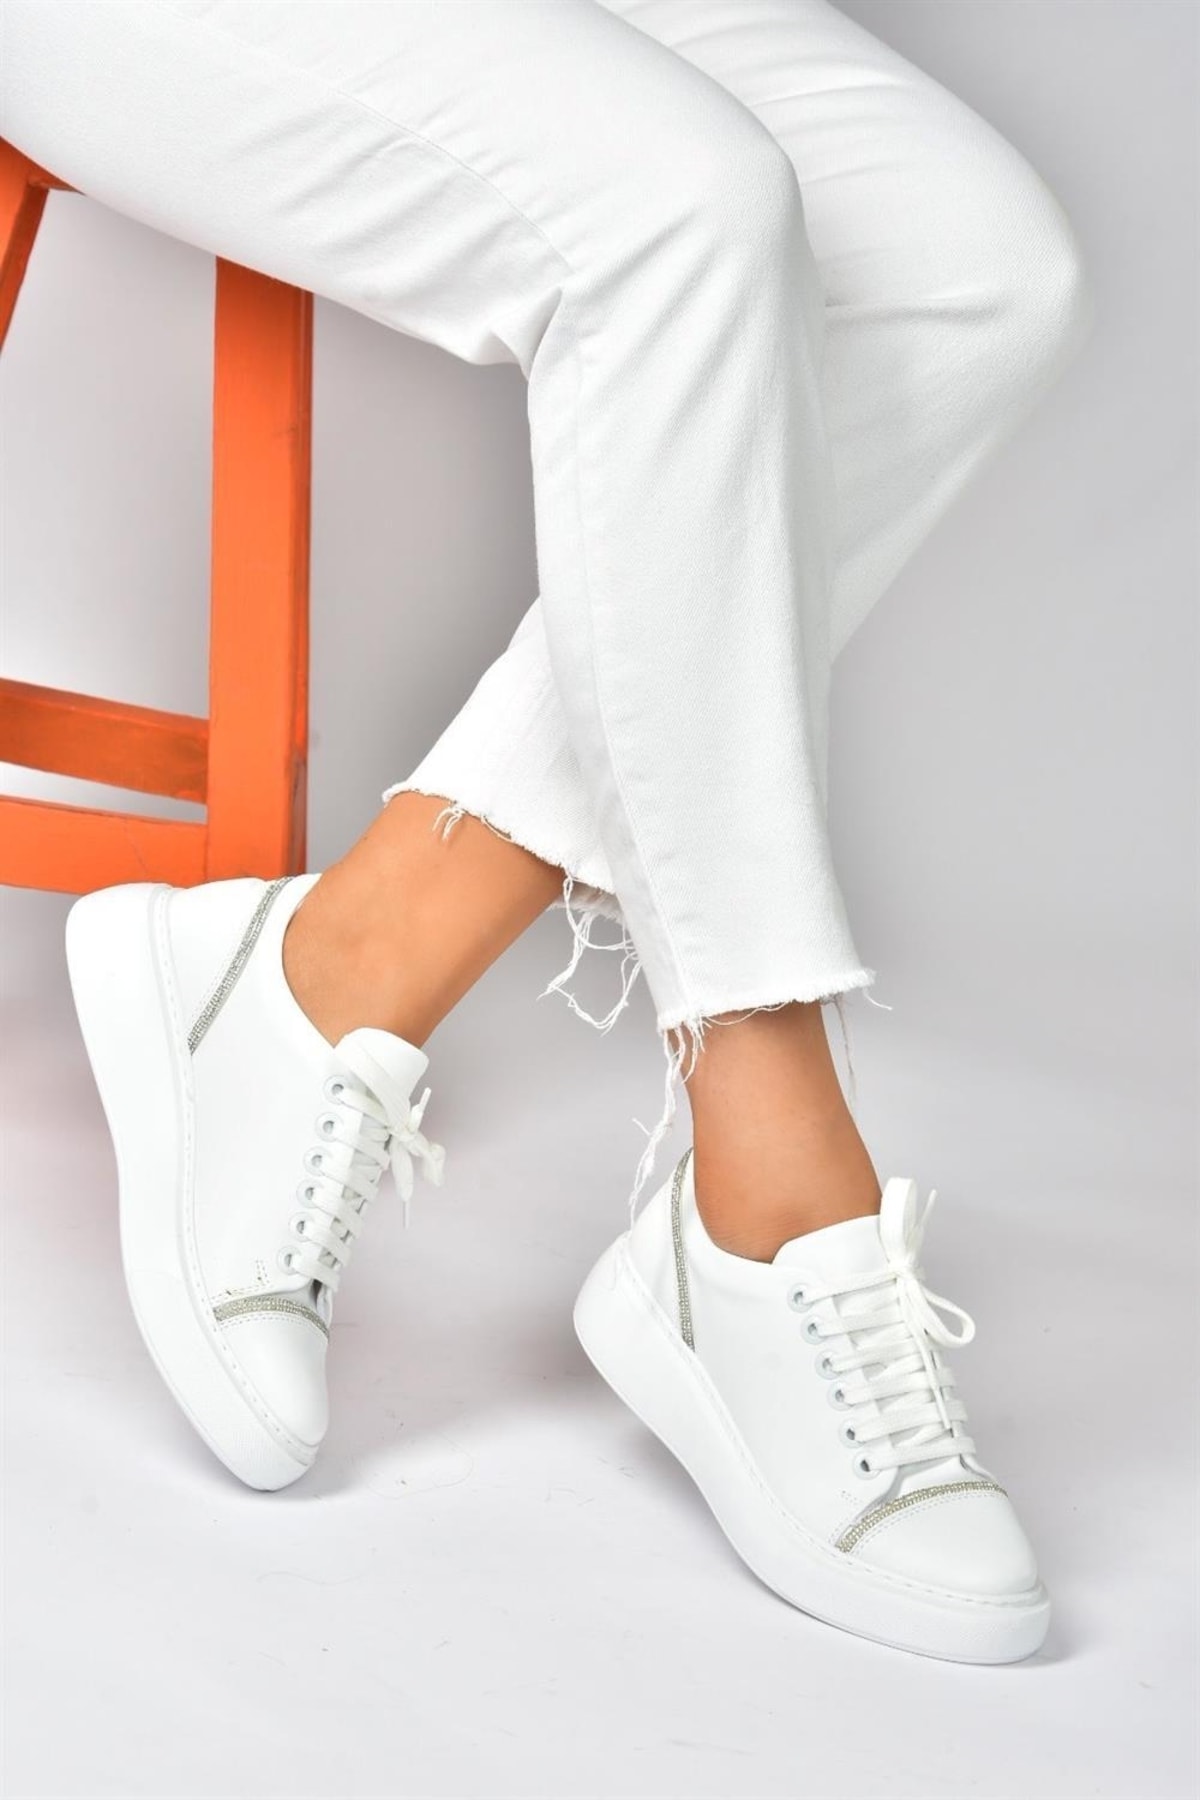 Fox Shoes White Stone Detailed Casual Sports Shoes Sneakers